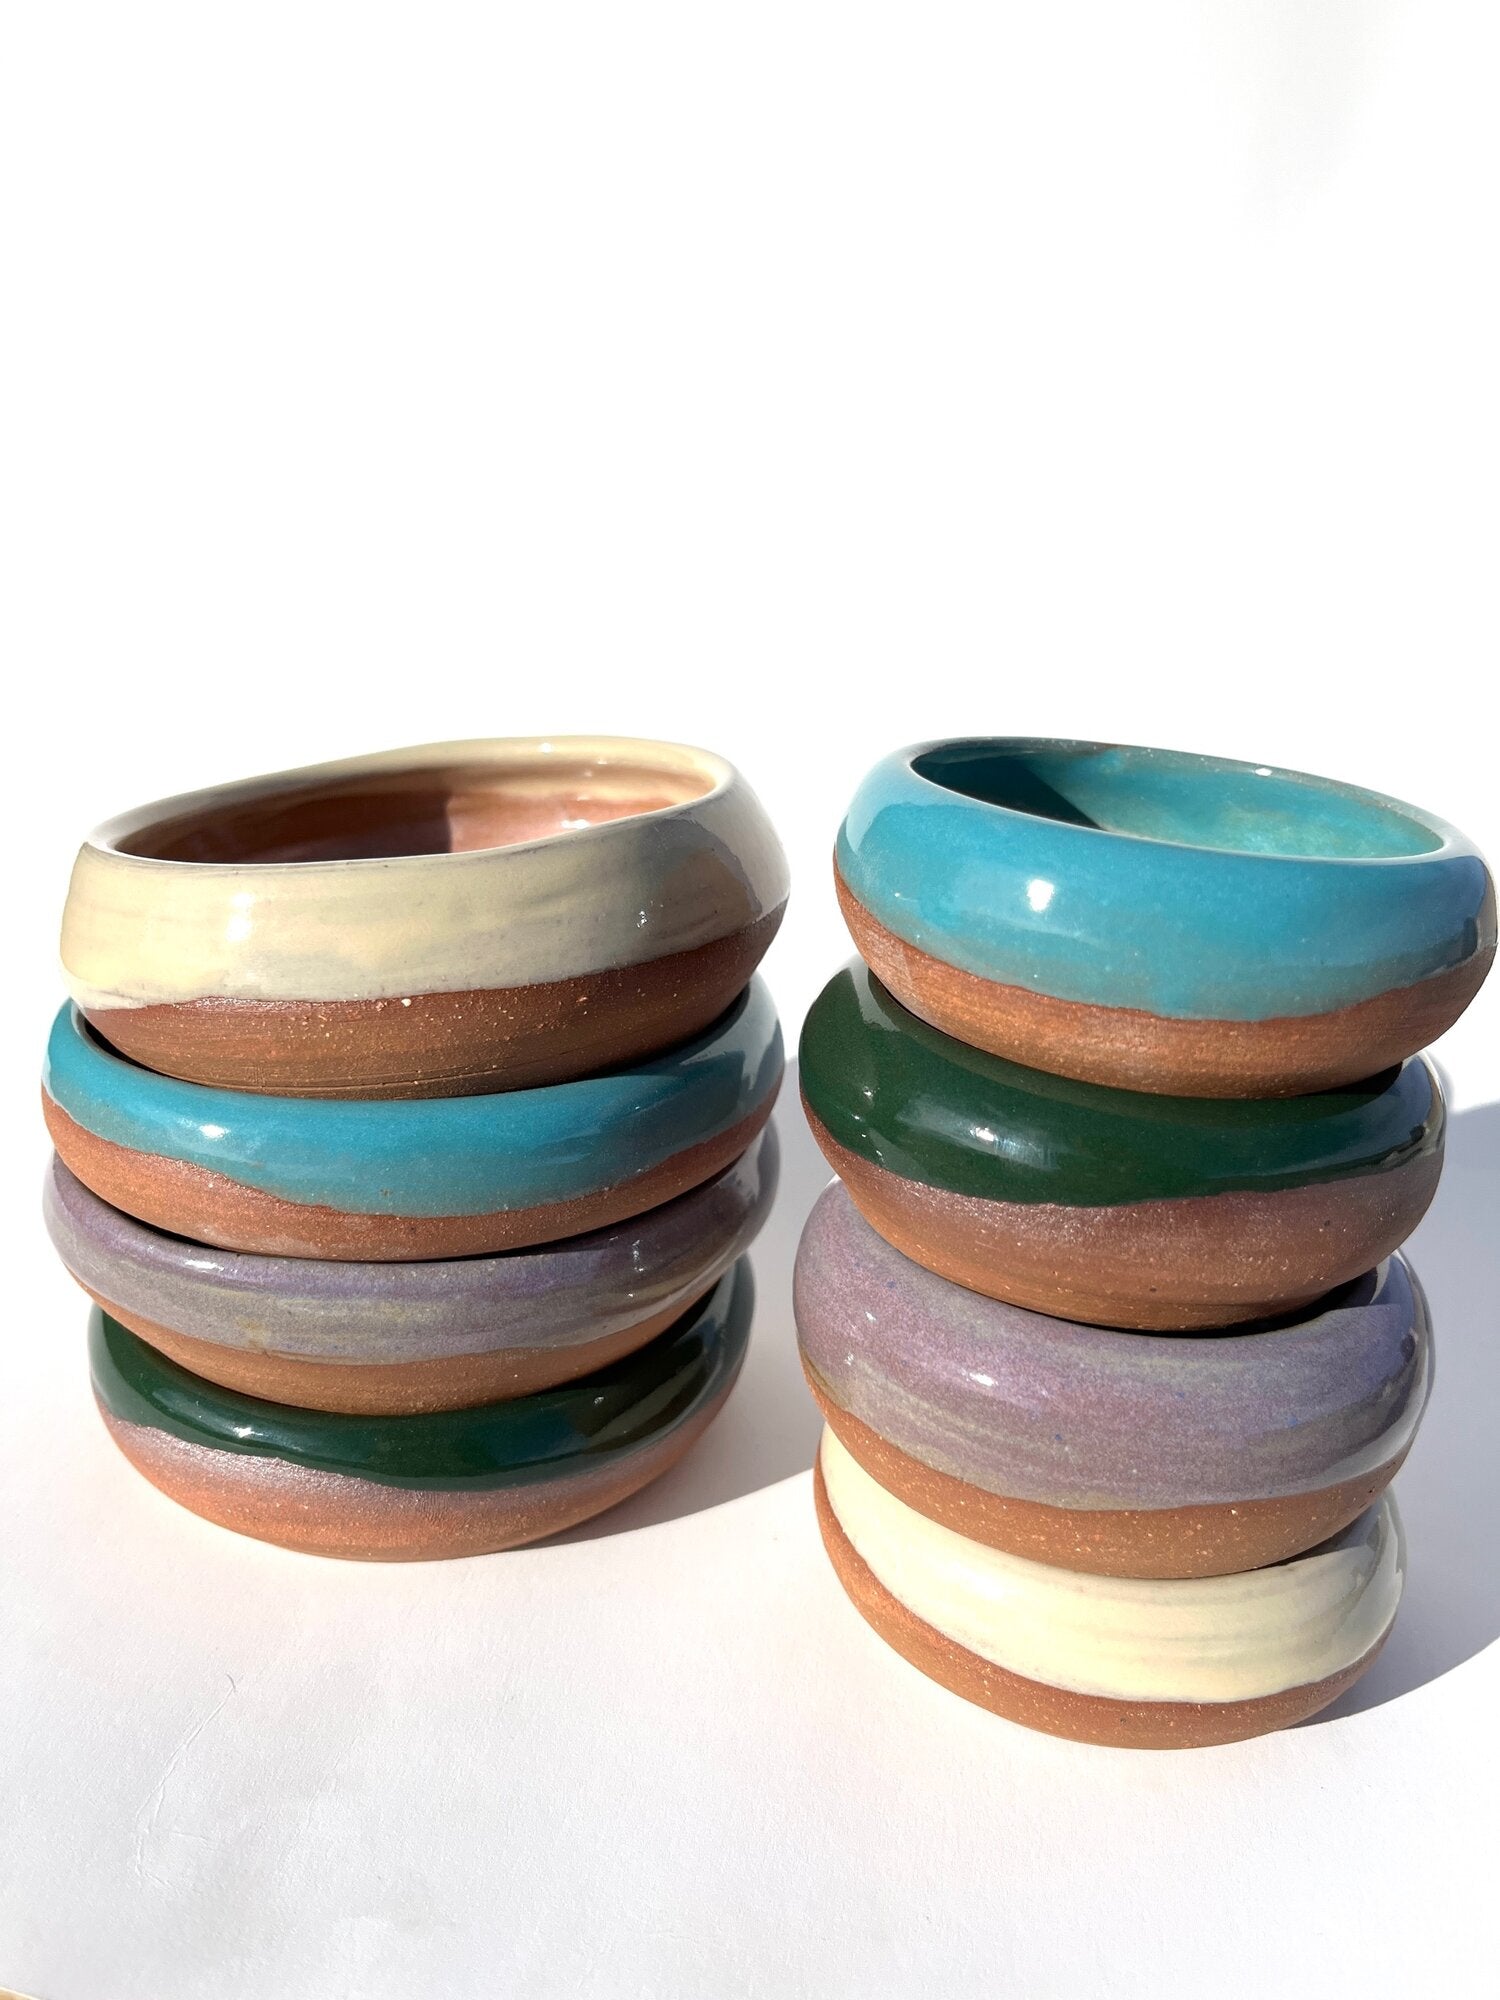 Hand thrown and hand dipped glazed ceramic nesting bowls by Ninth House Goods. A pair of nesting bowls that would be perfect for oil dipping, salsa, or your special jewels and artifacts.